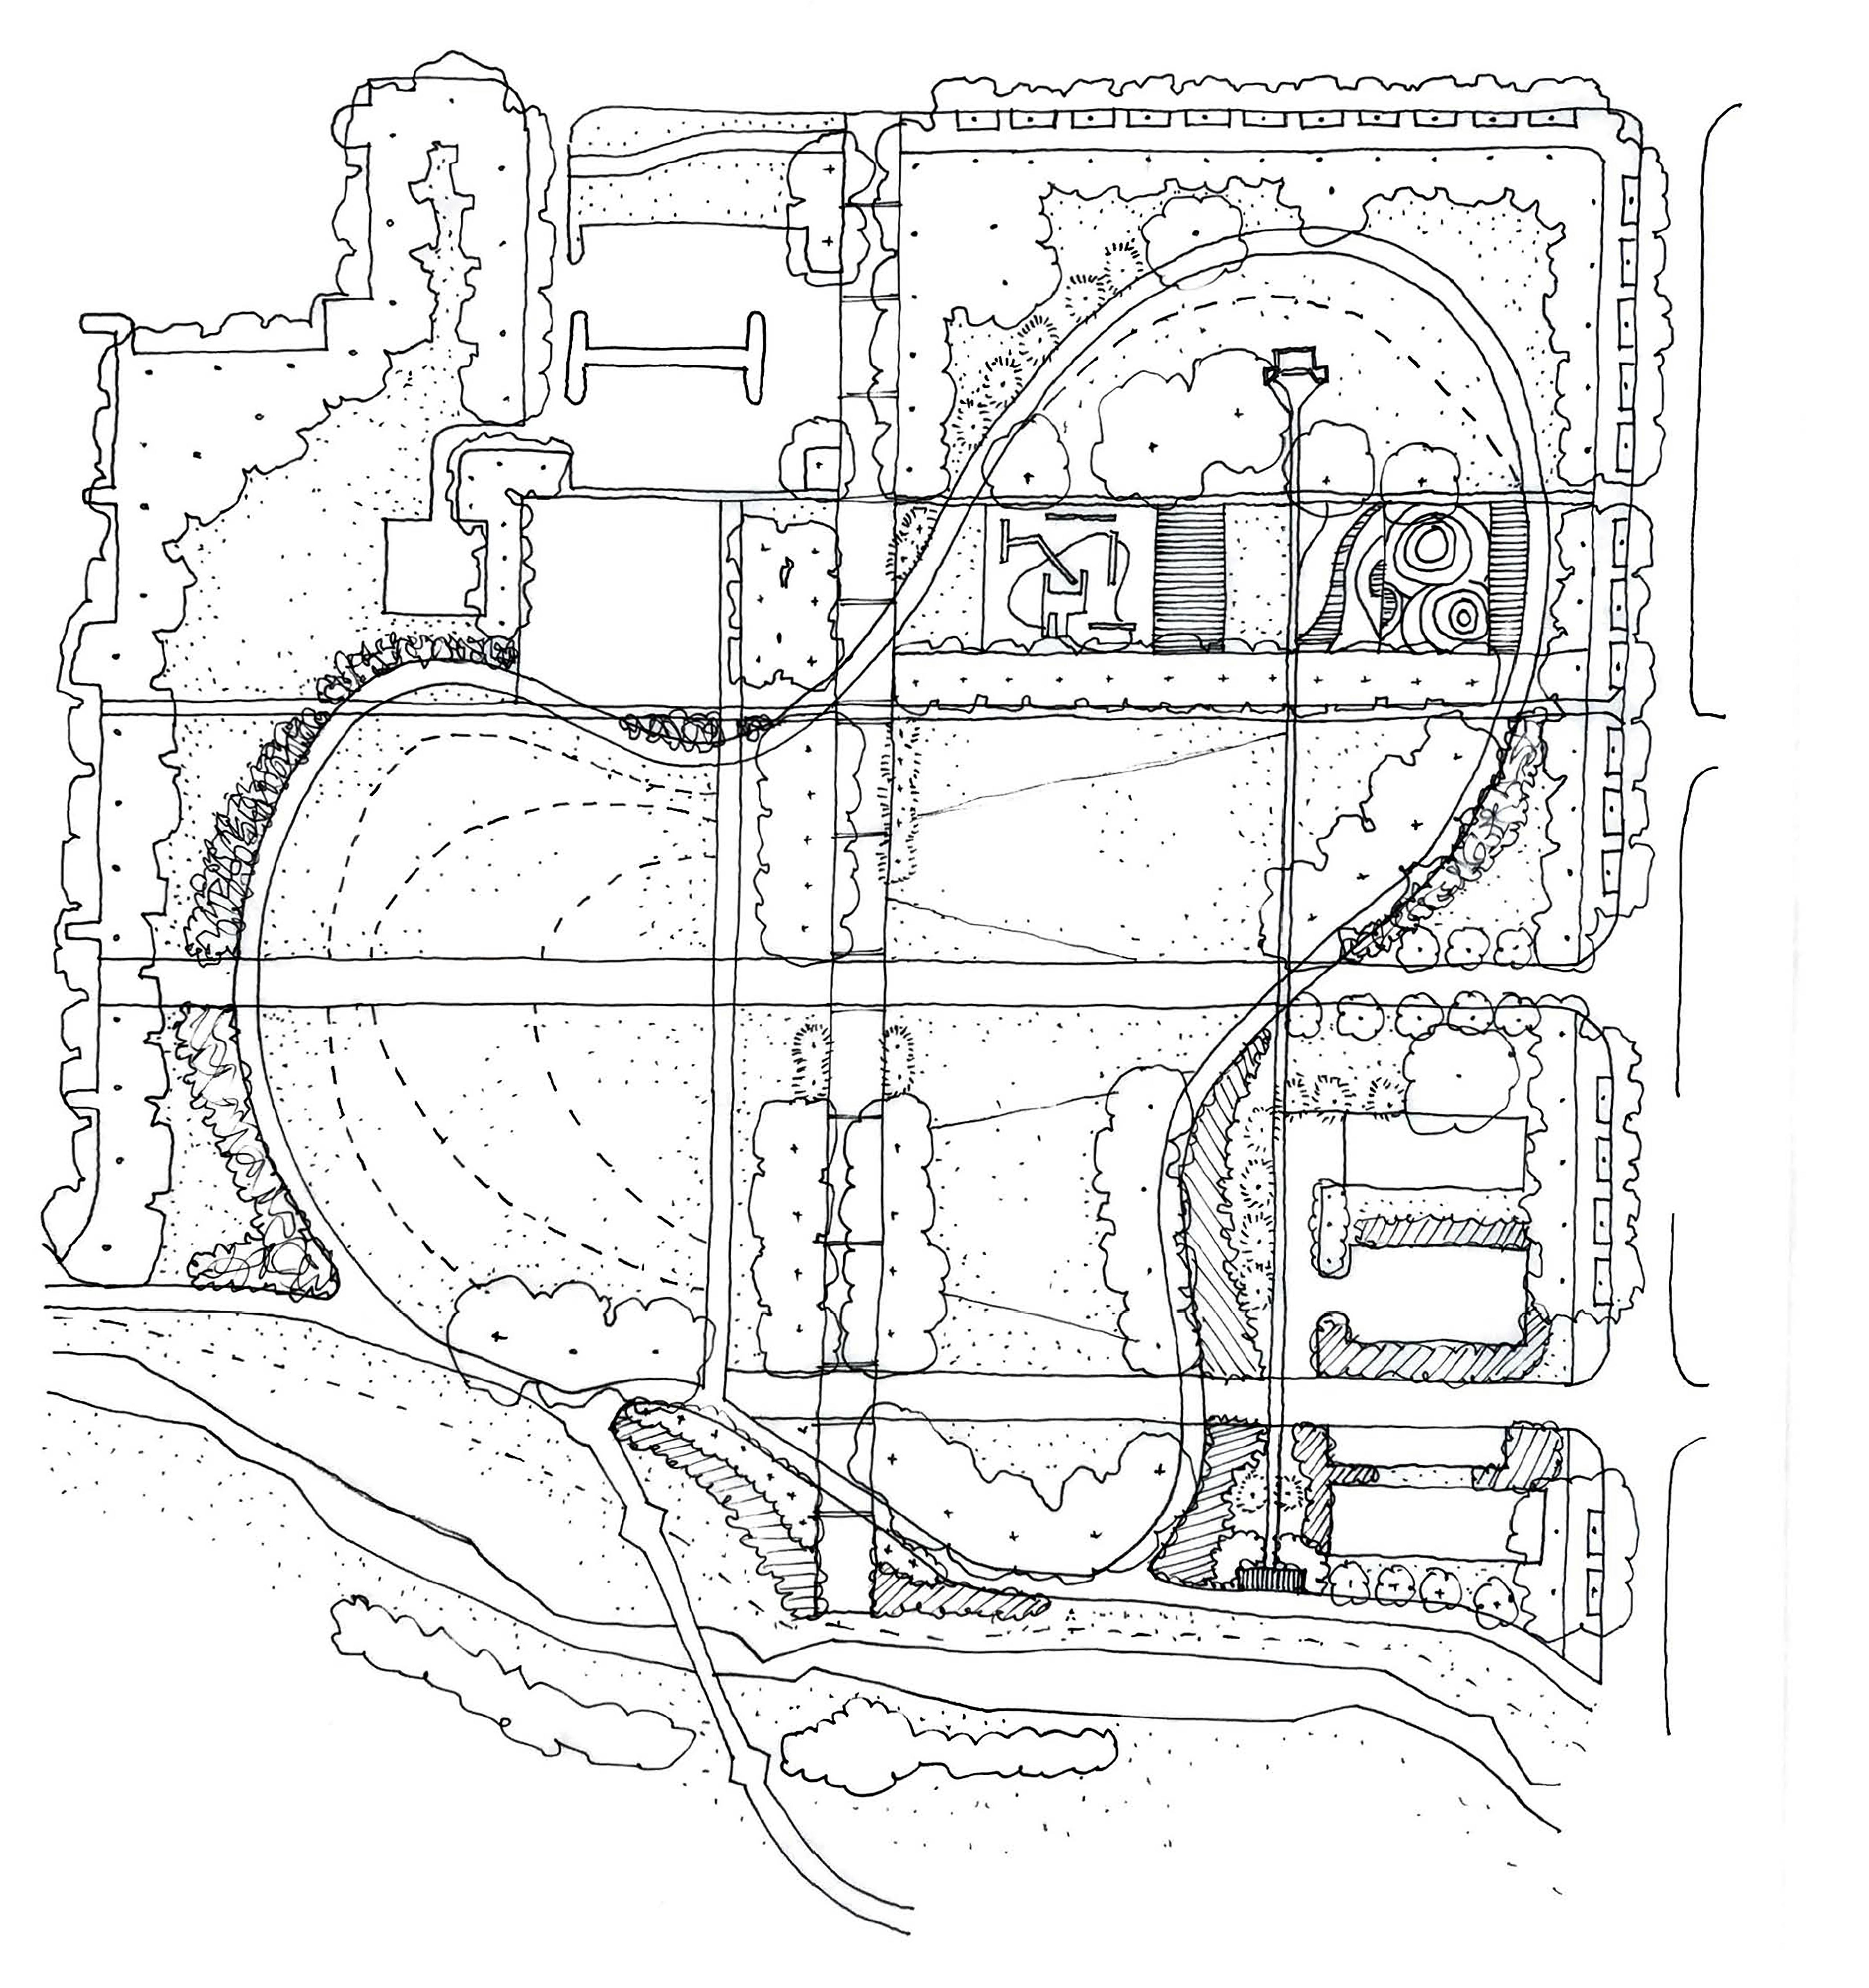 Original black and white hand sketch site plan of Luther George Park.